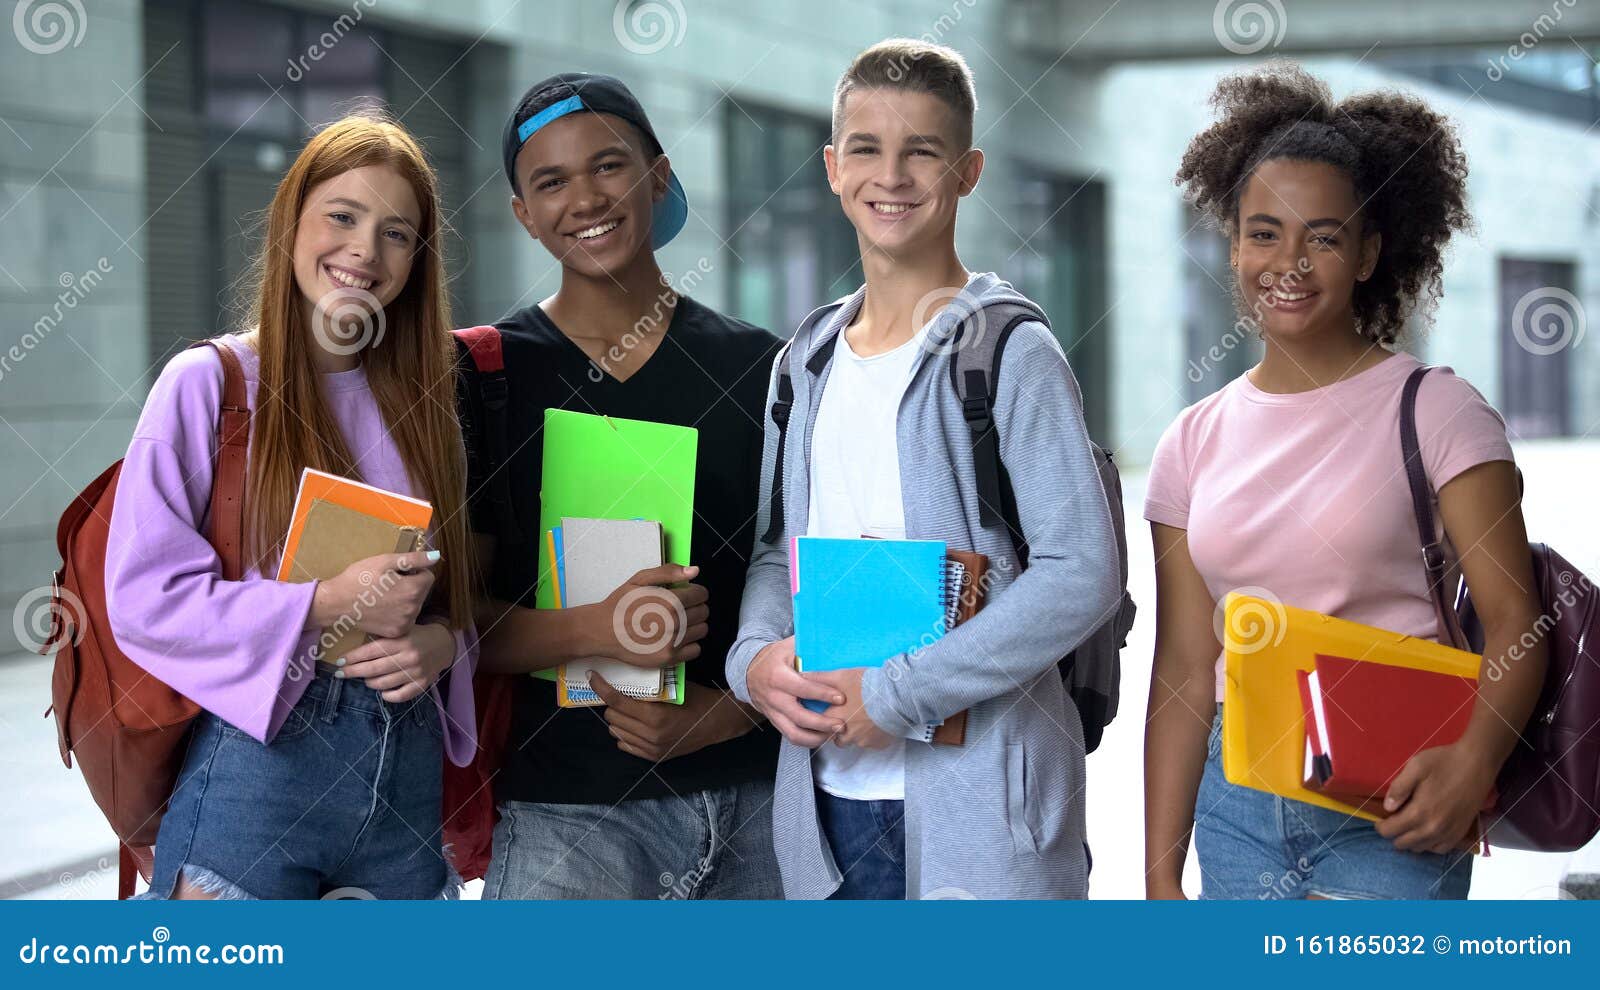 multiracial high school students with books smiling camera, educational program